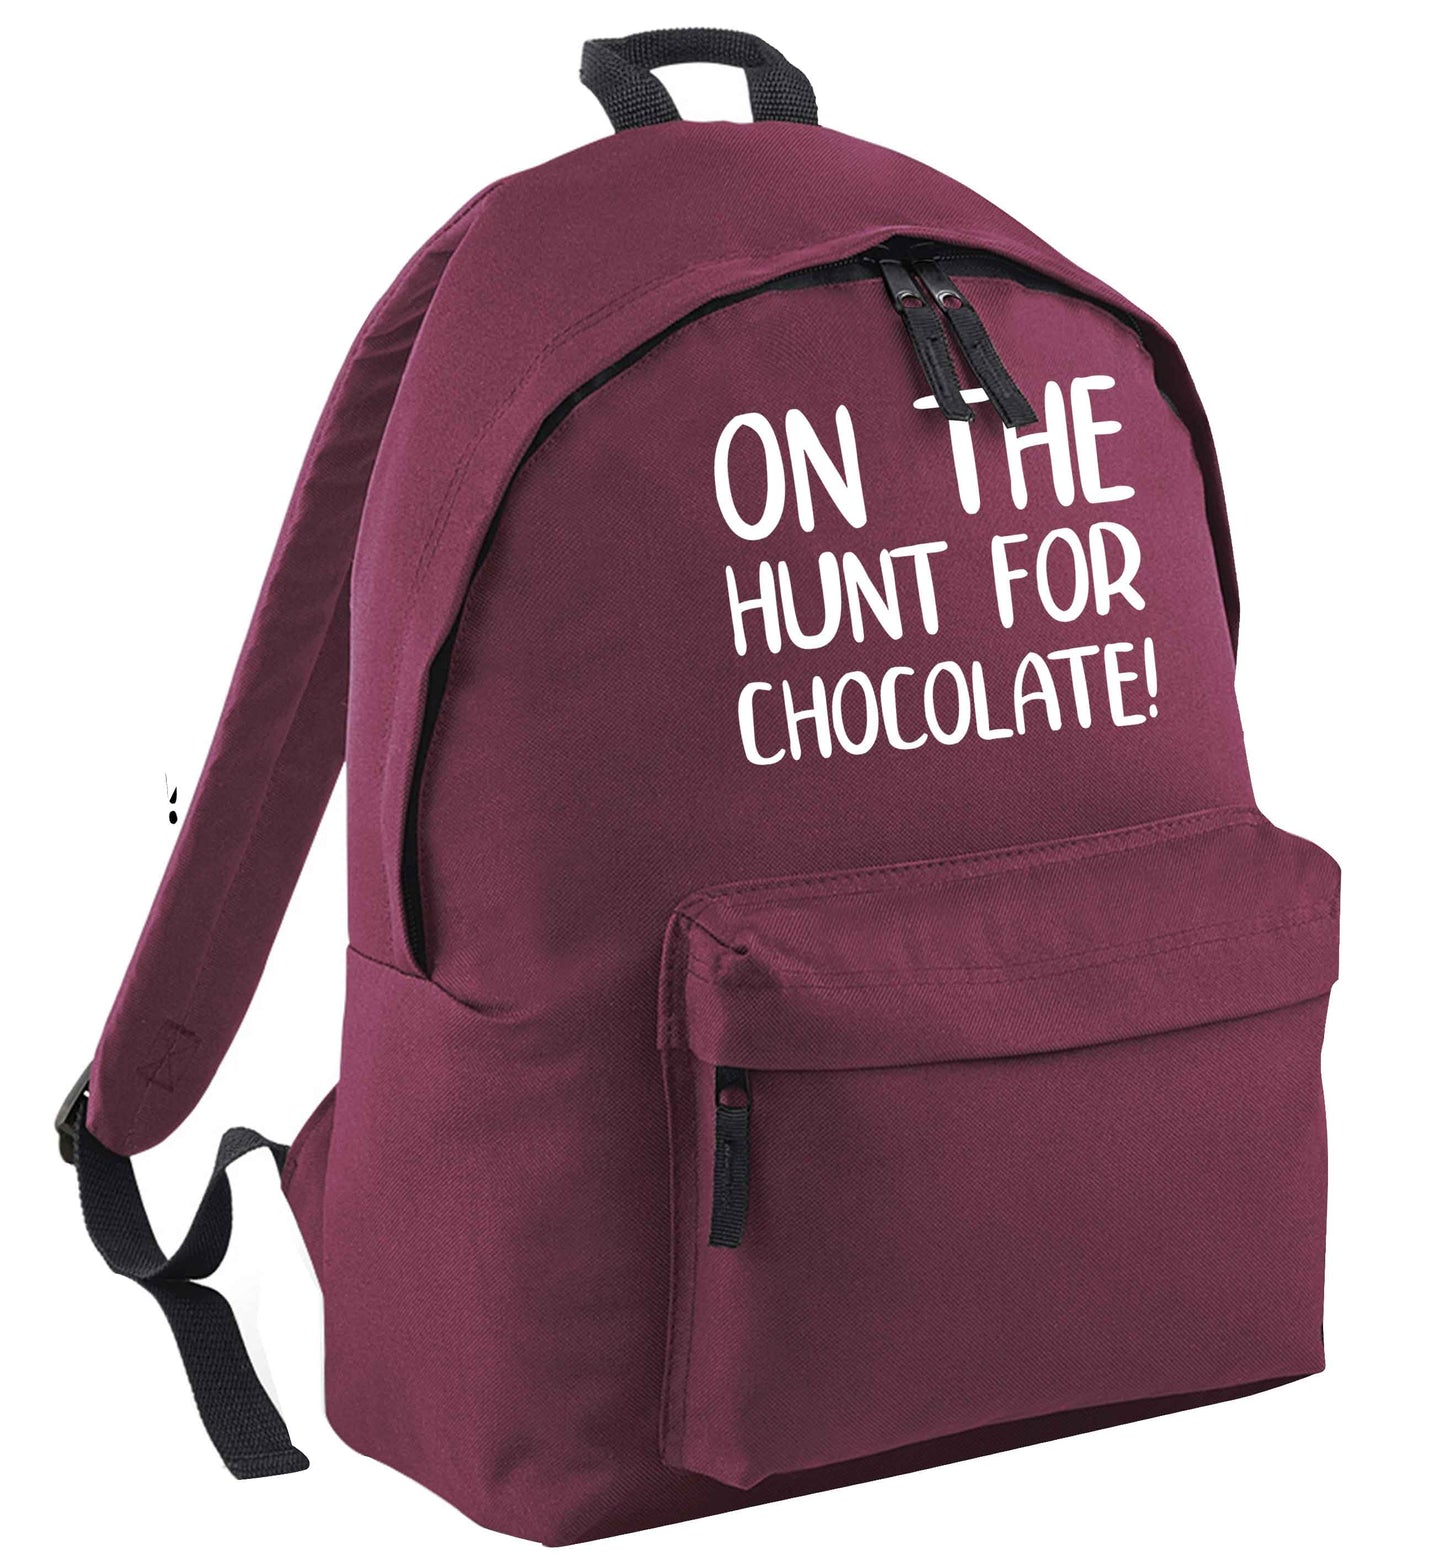 On the hunt for chocolate! maroon adults backpack